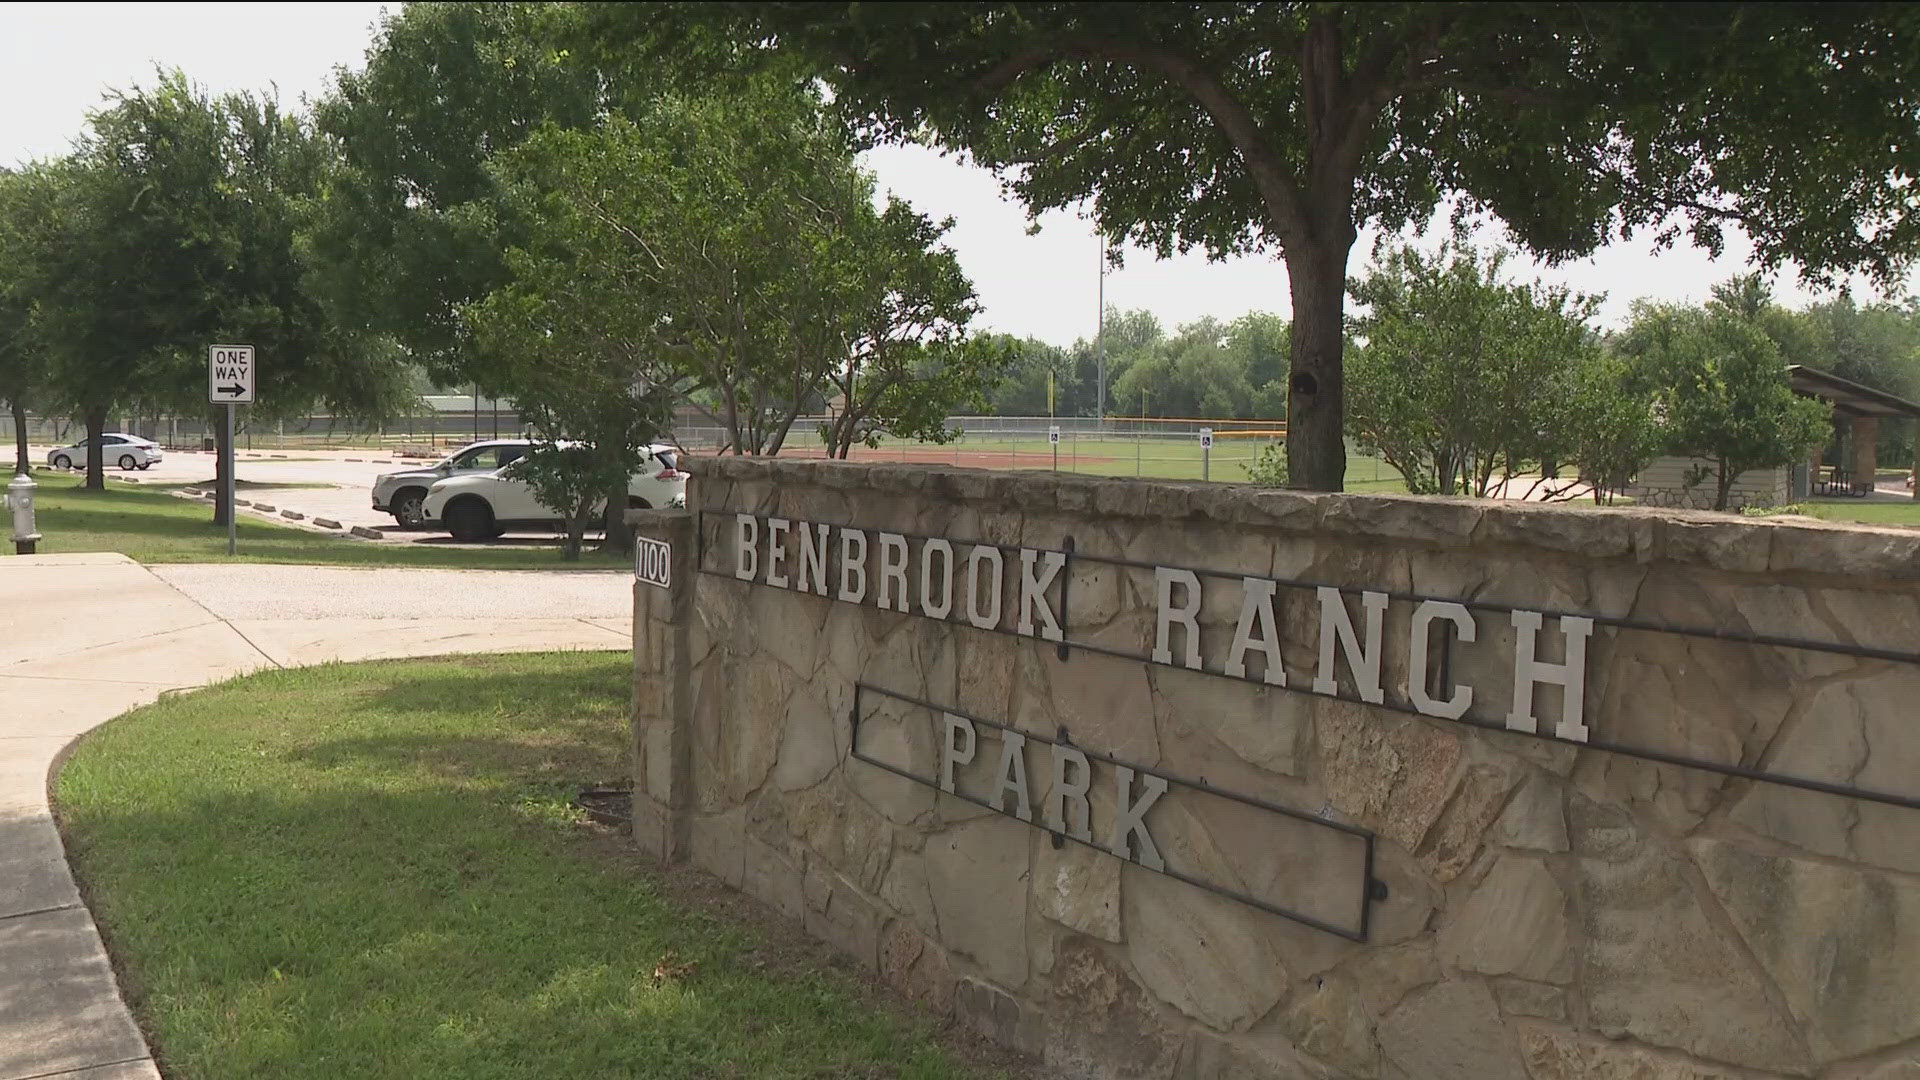 Police said the incident occurred on Tuesday afternoon near Benbrook Ranch Park.